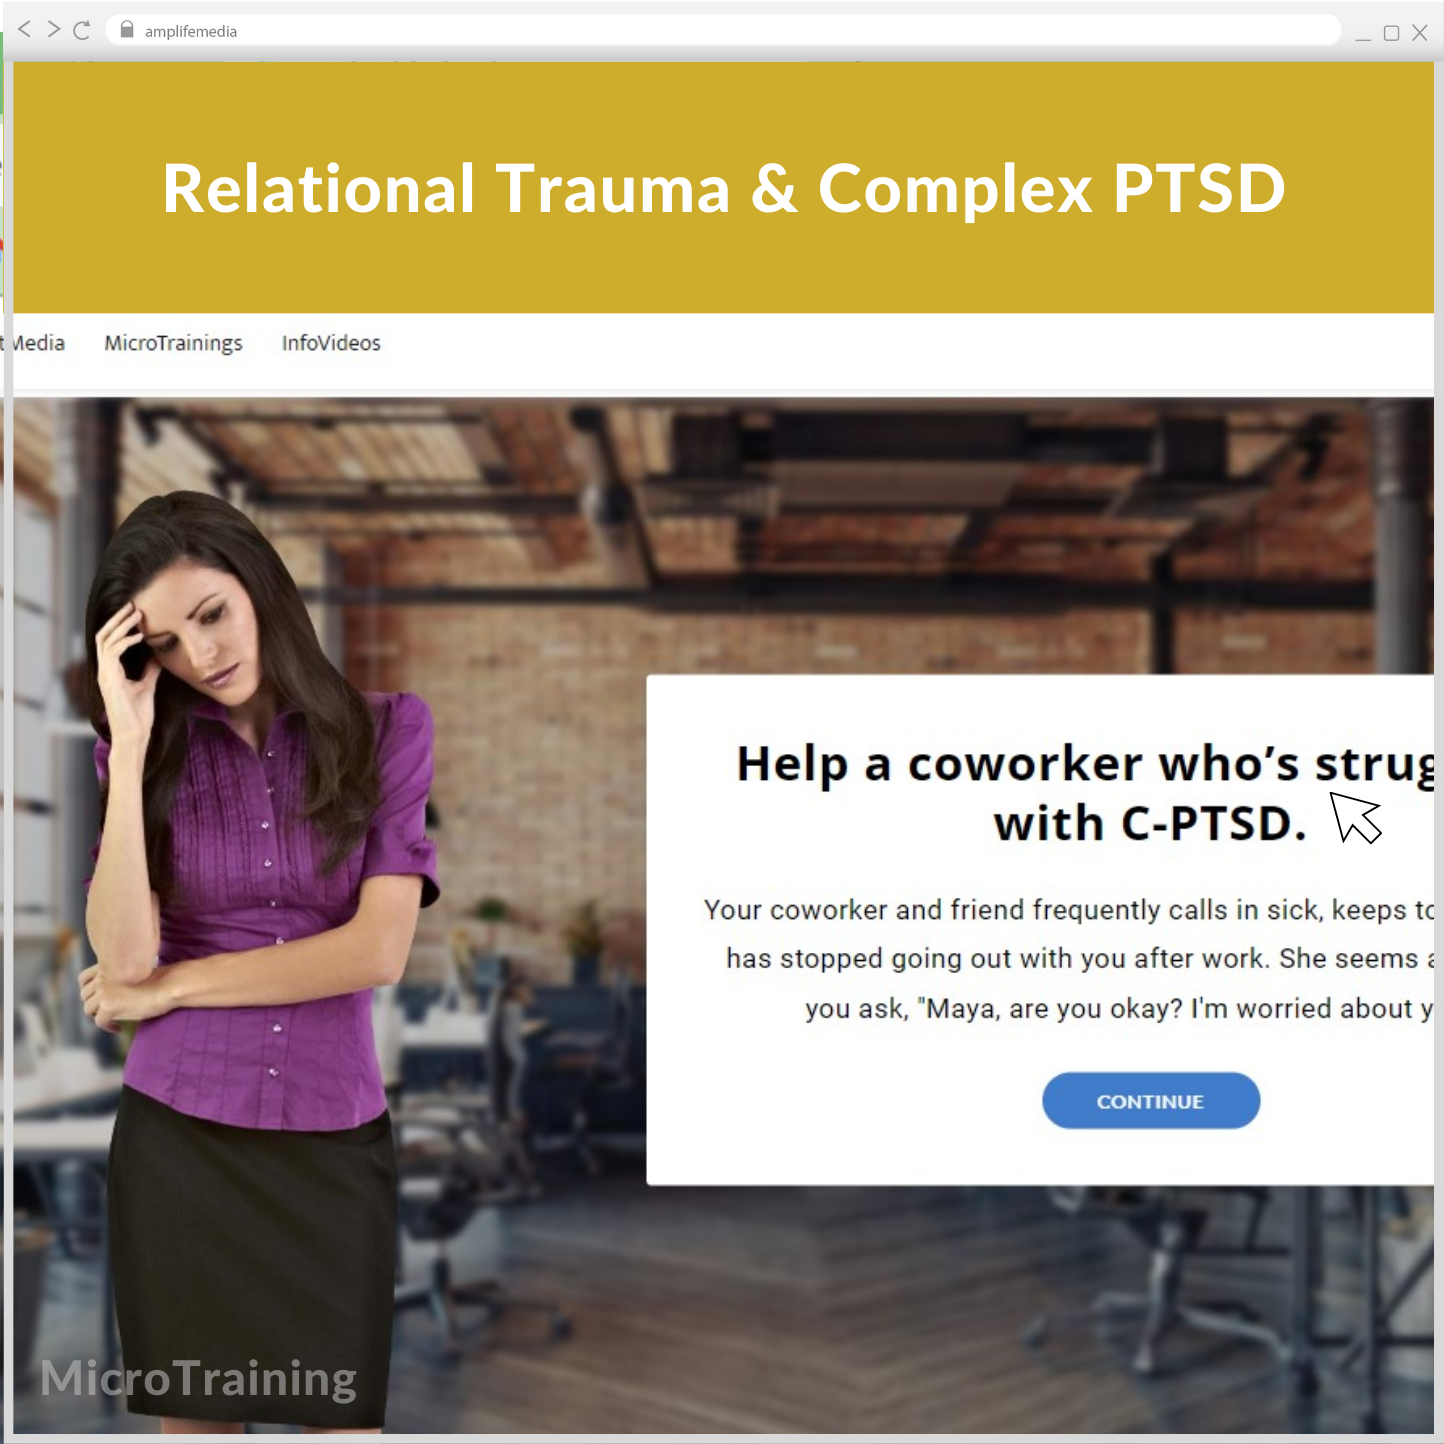 Subscription to Wellbeing Media: Relational Trauma & Complex PTSD MT 1123